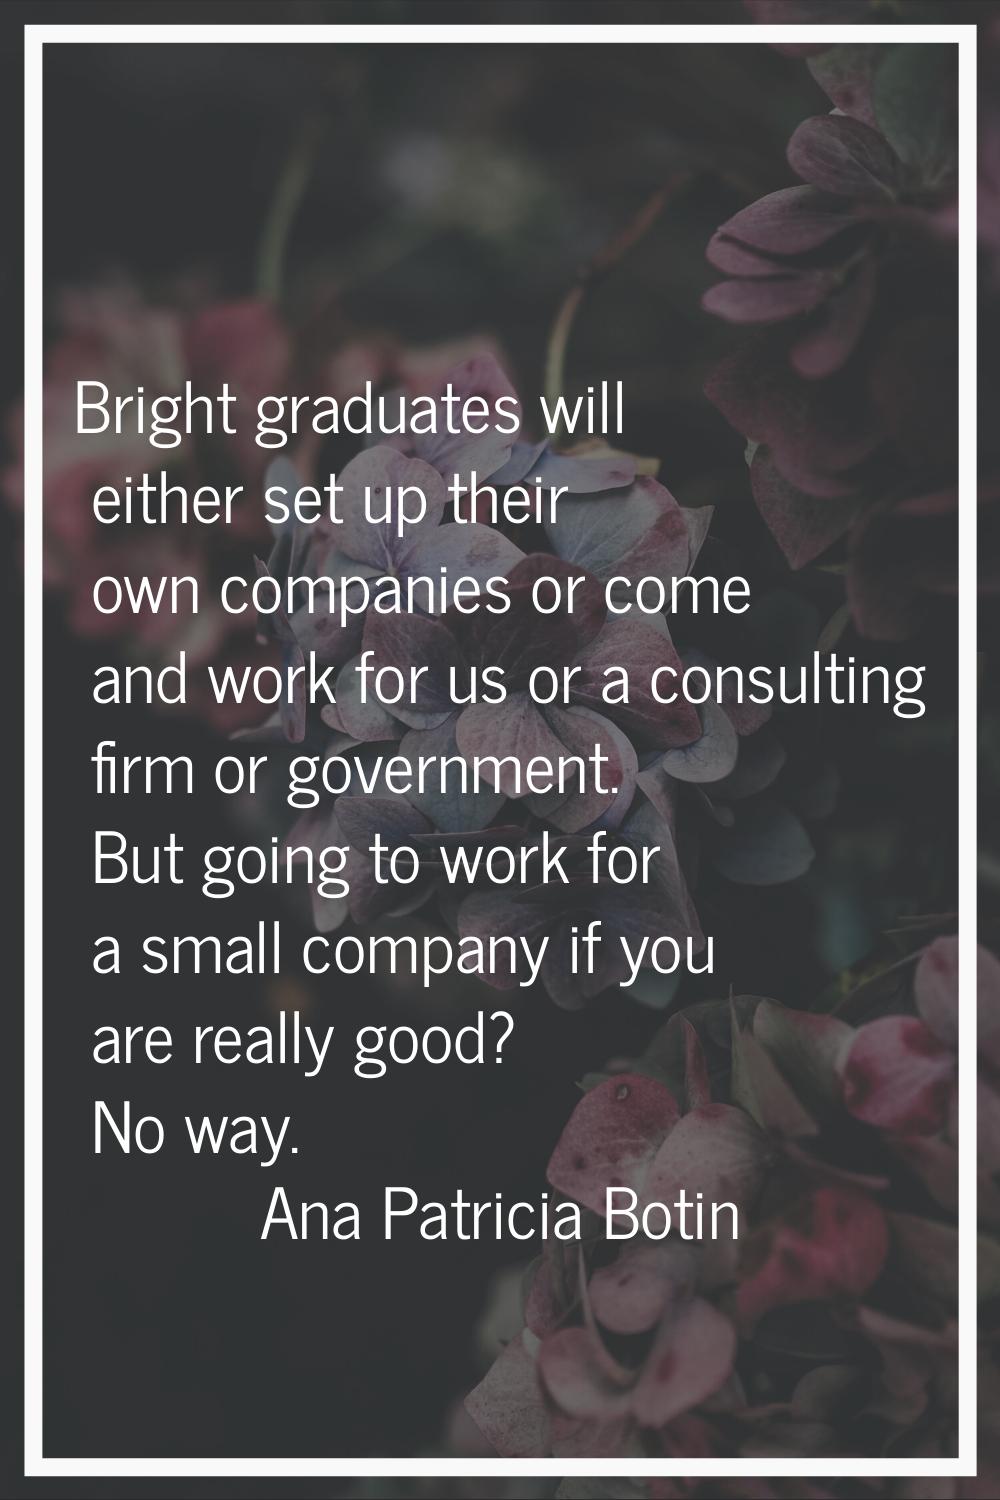 Bright graduates will either set up their own companies or come and work for us or a consulting fir